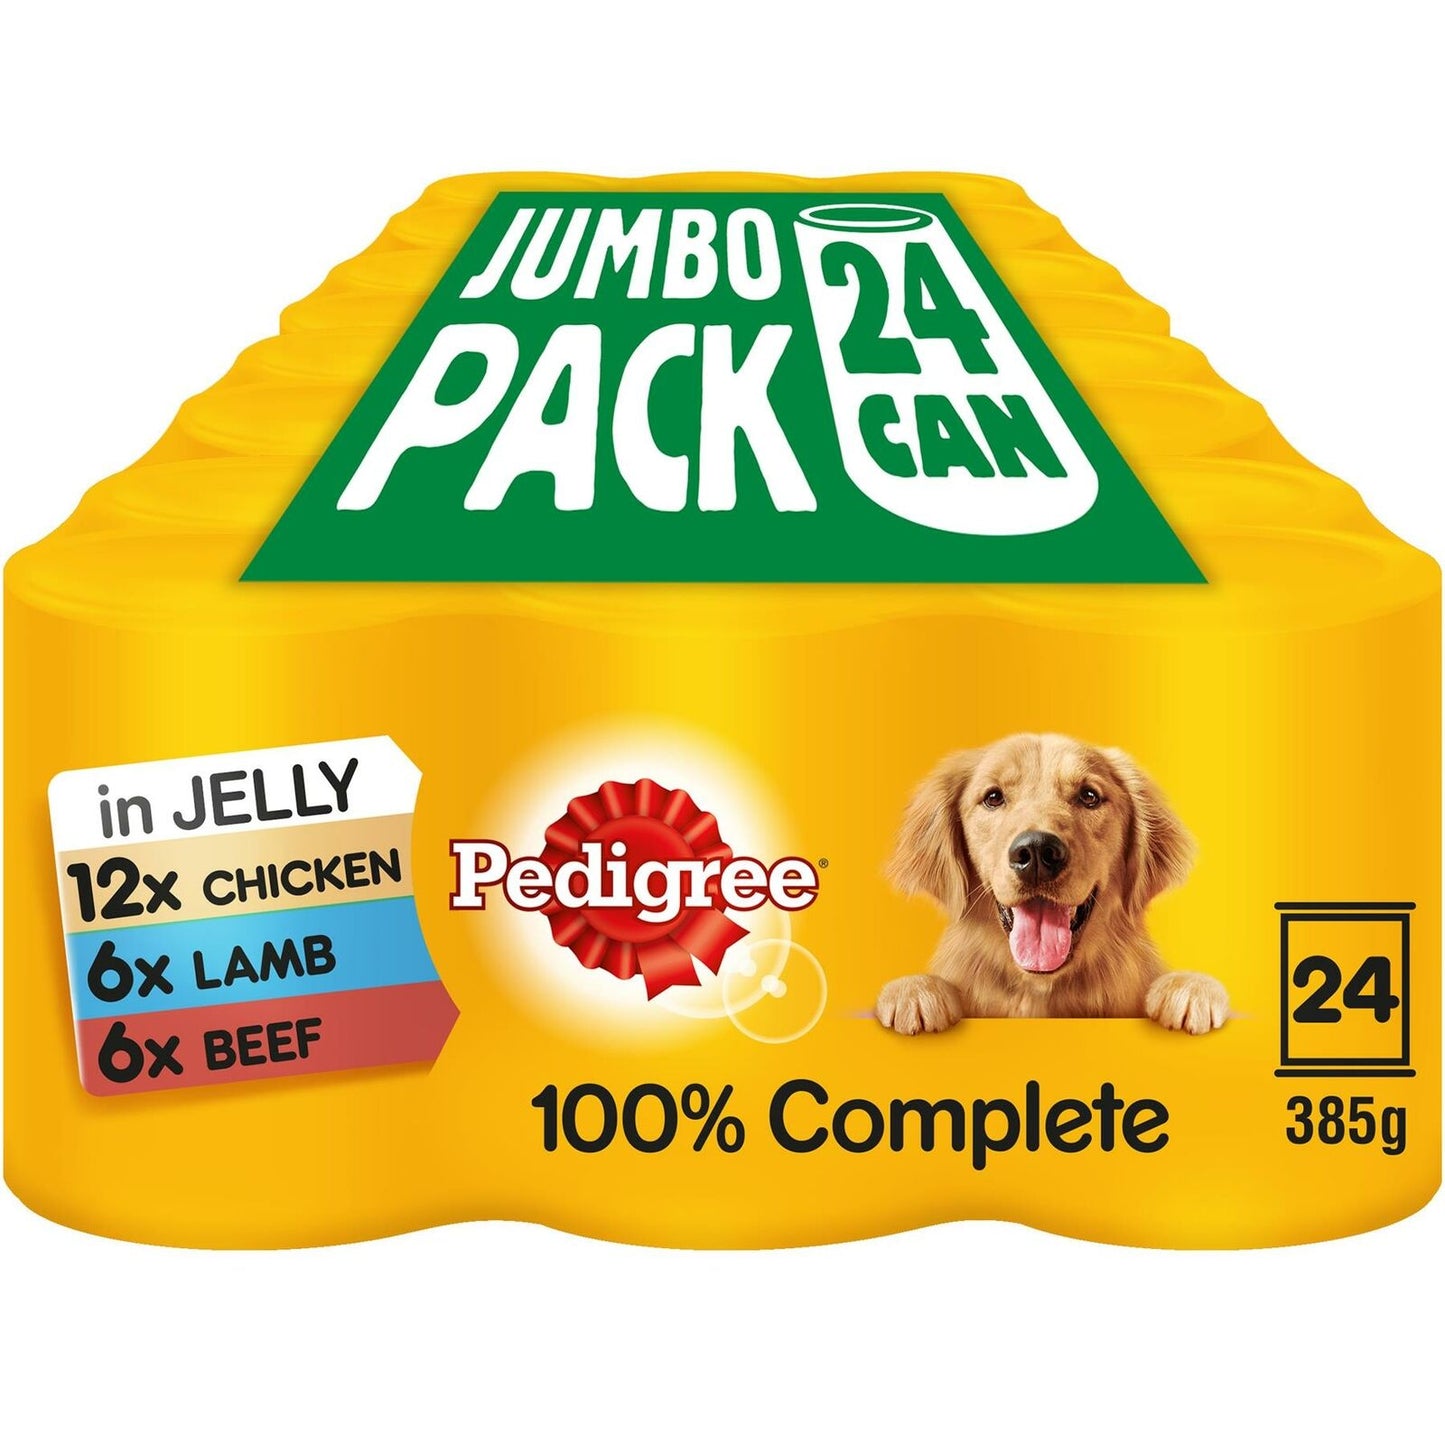 Pedigree - Mixed Selection in Jelly Tins (24 x 385g)